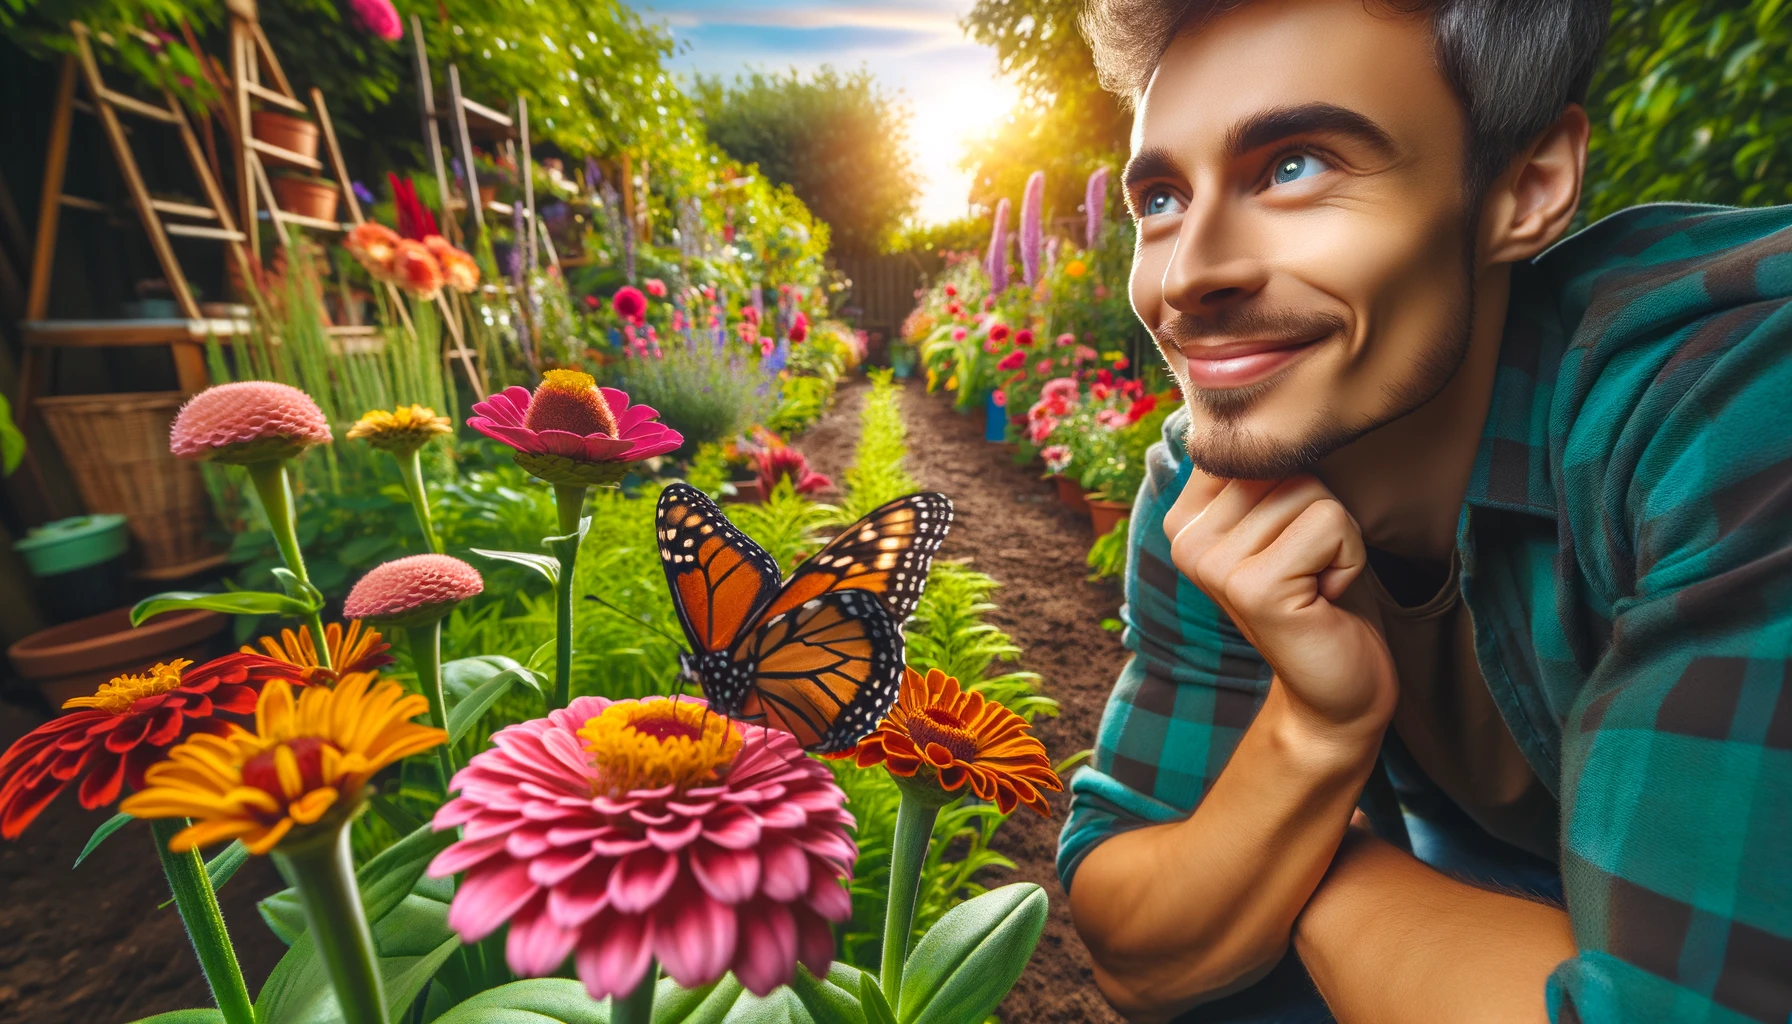 Man admiring butterfly in vibrant garden at sunset.